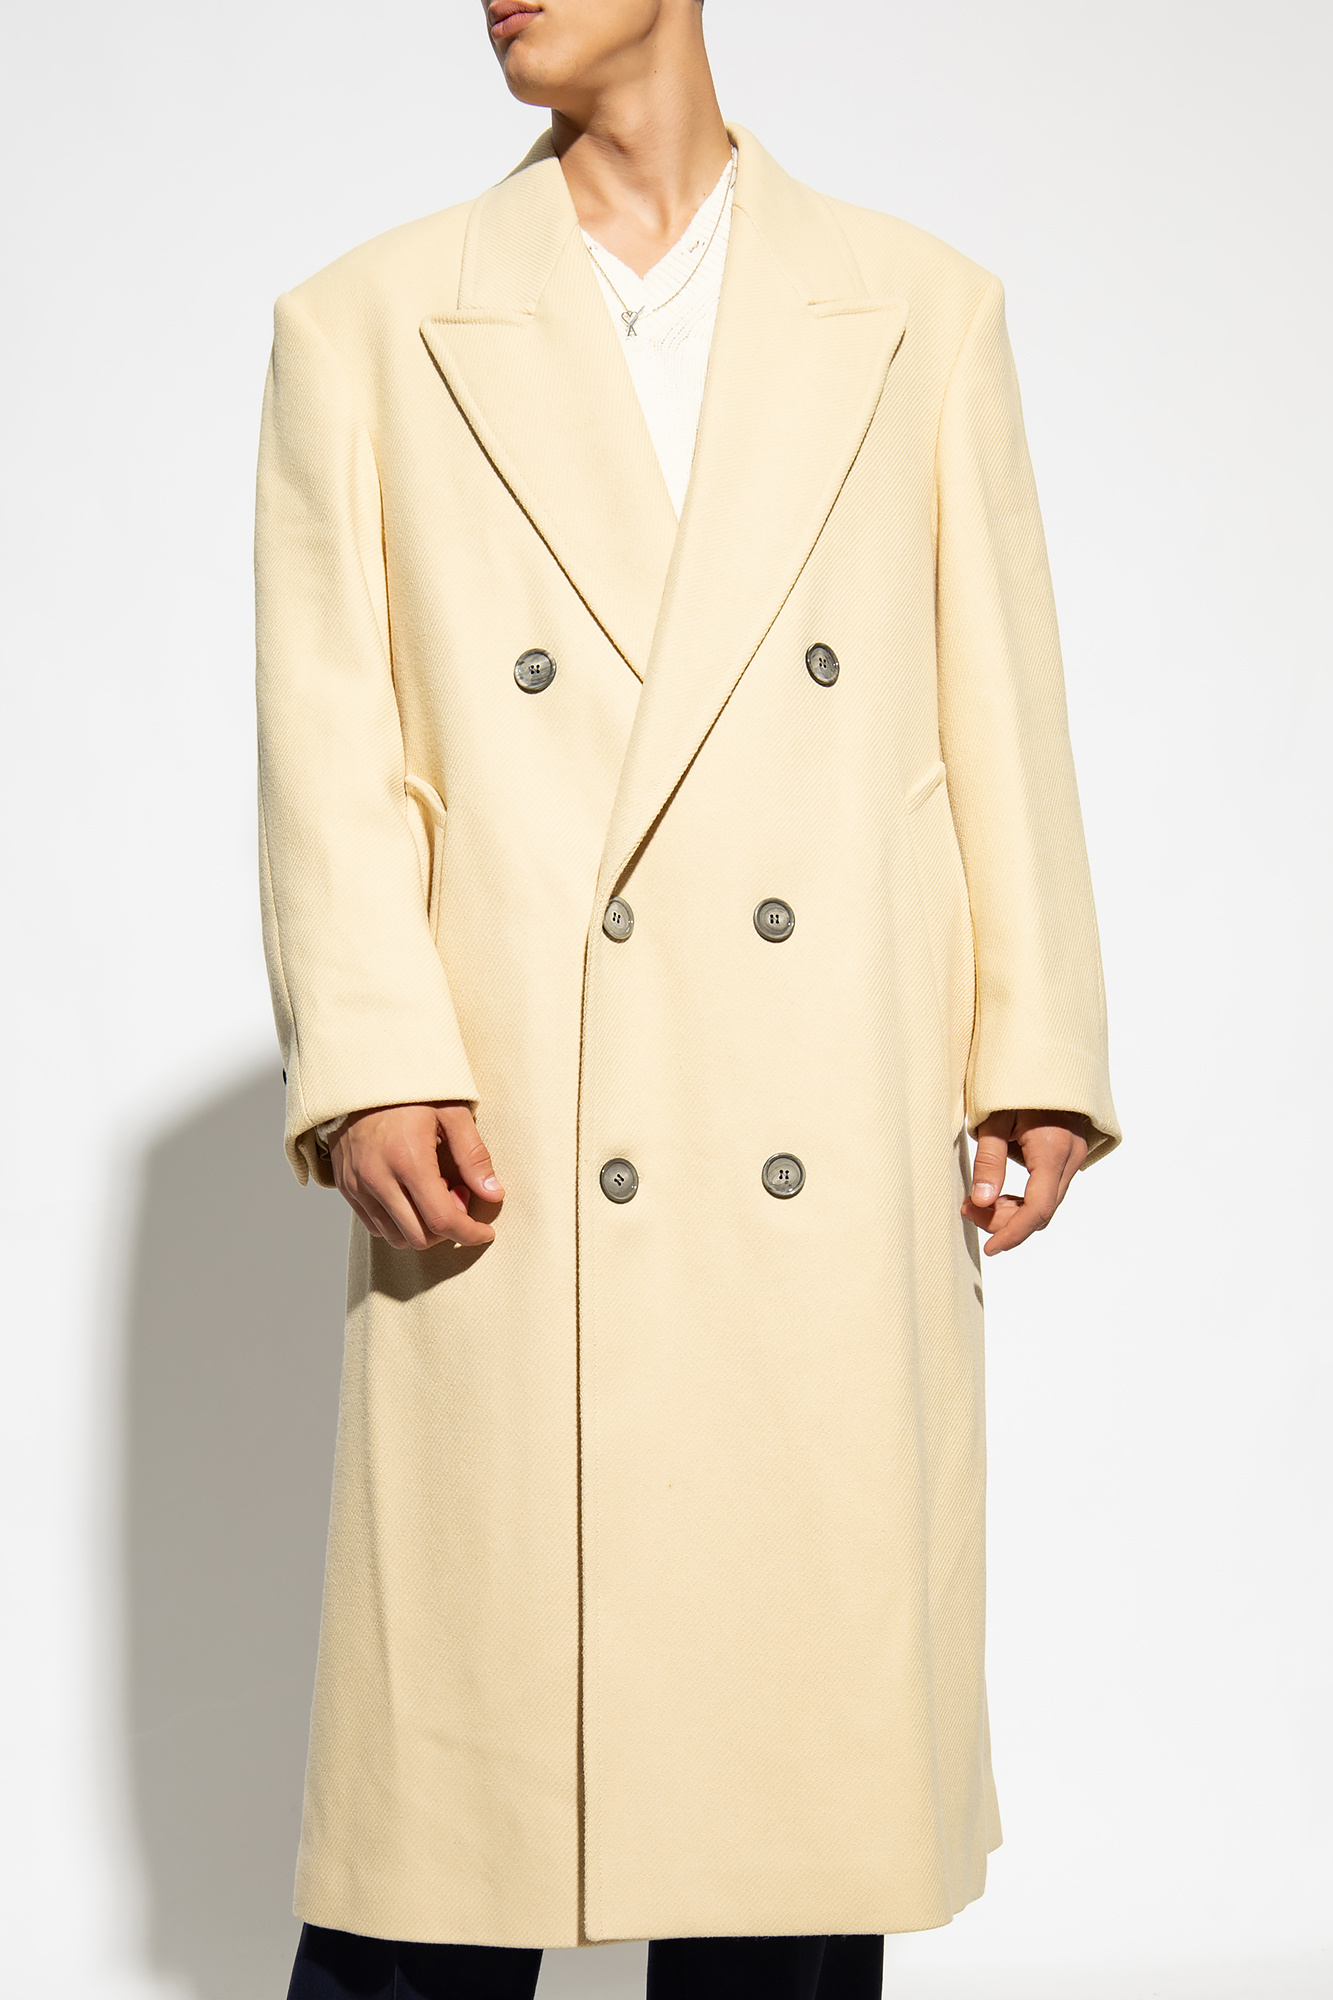 Frequently asked questions Wool coat